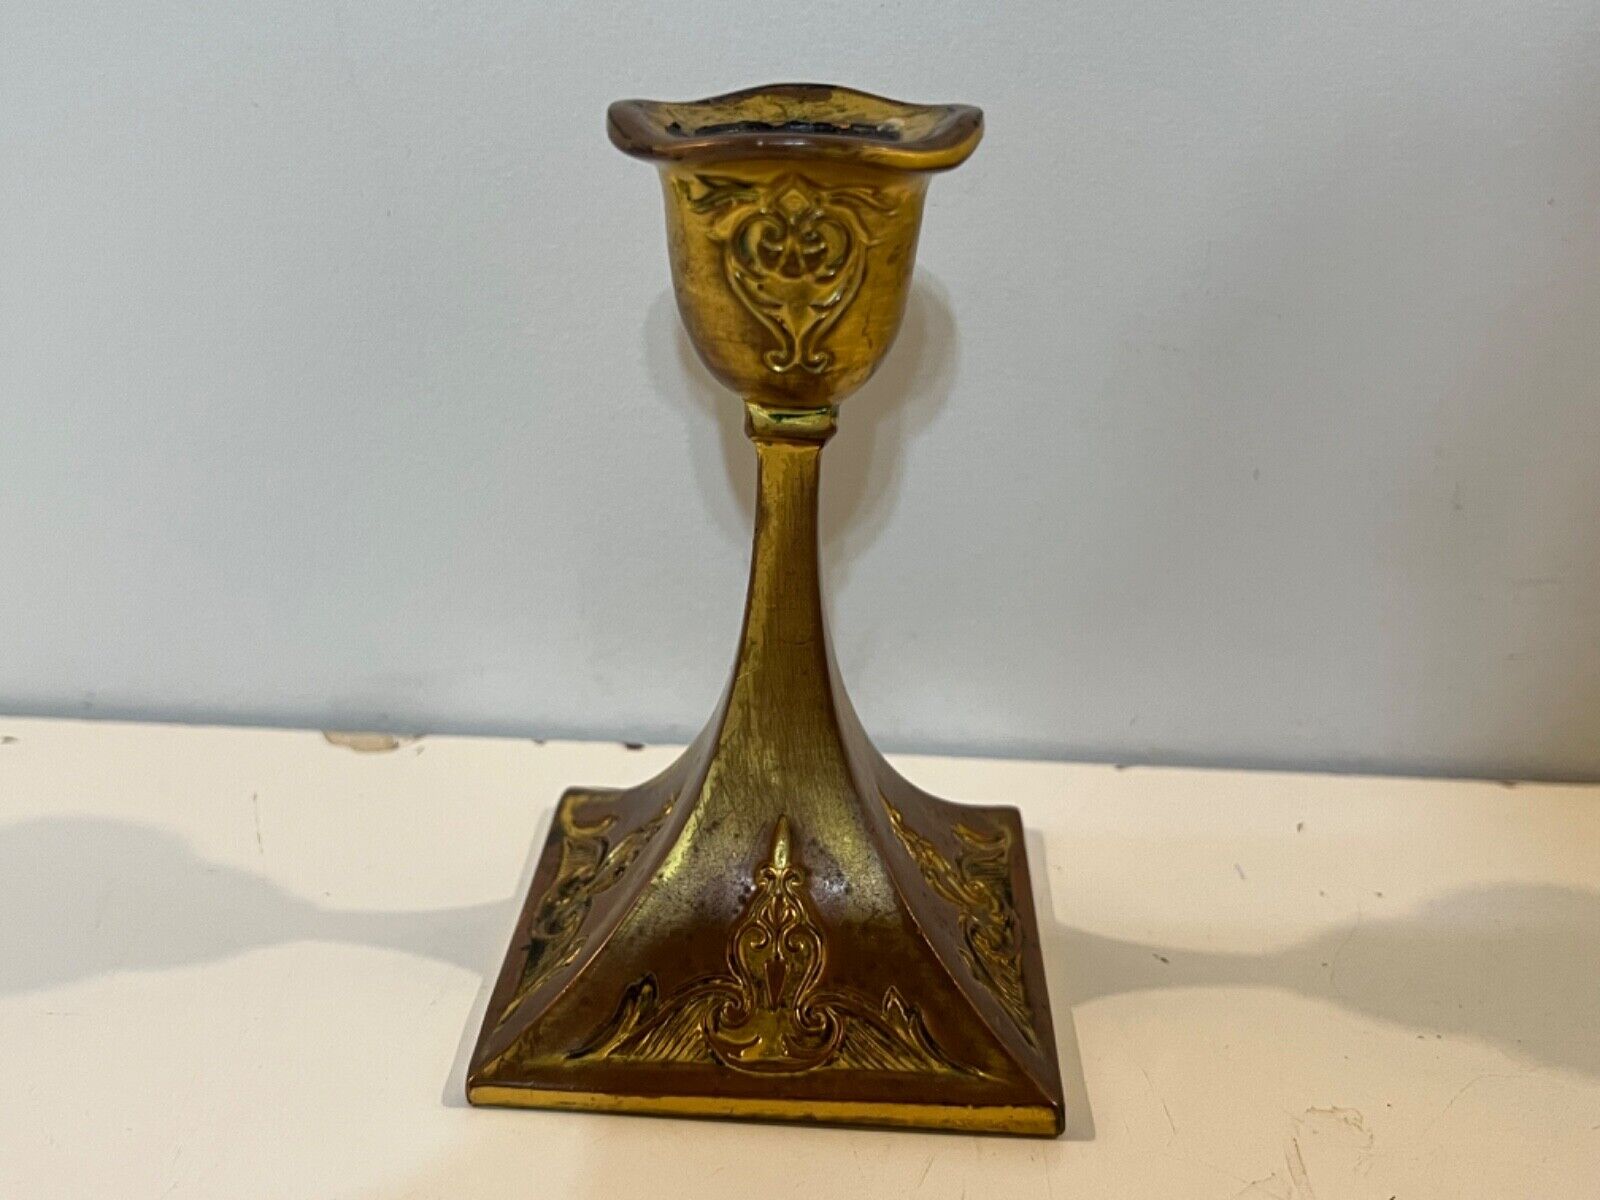 Vintage Petite Brass Candlestick with Ornate Decorations